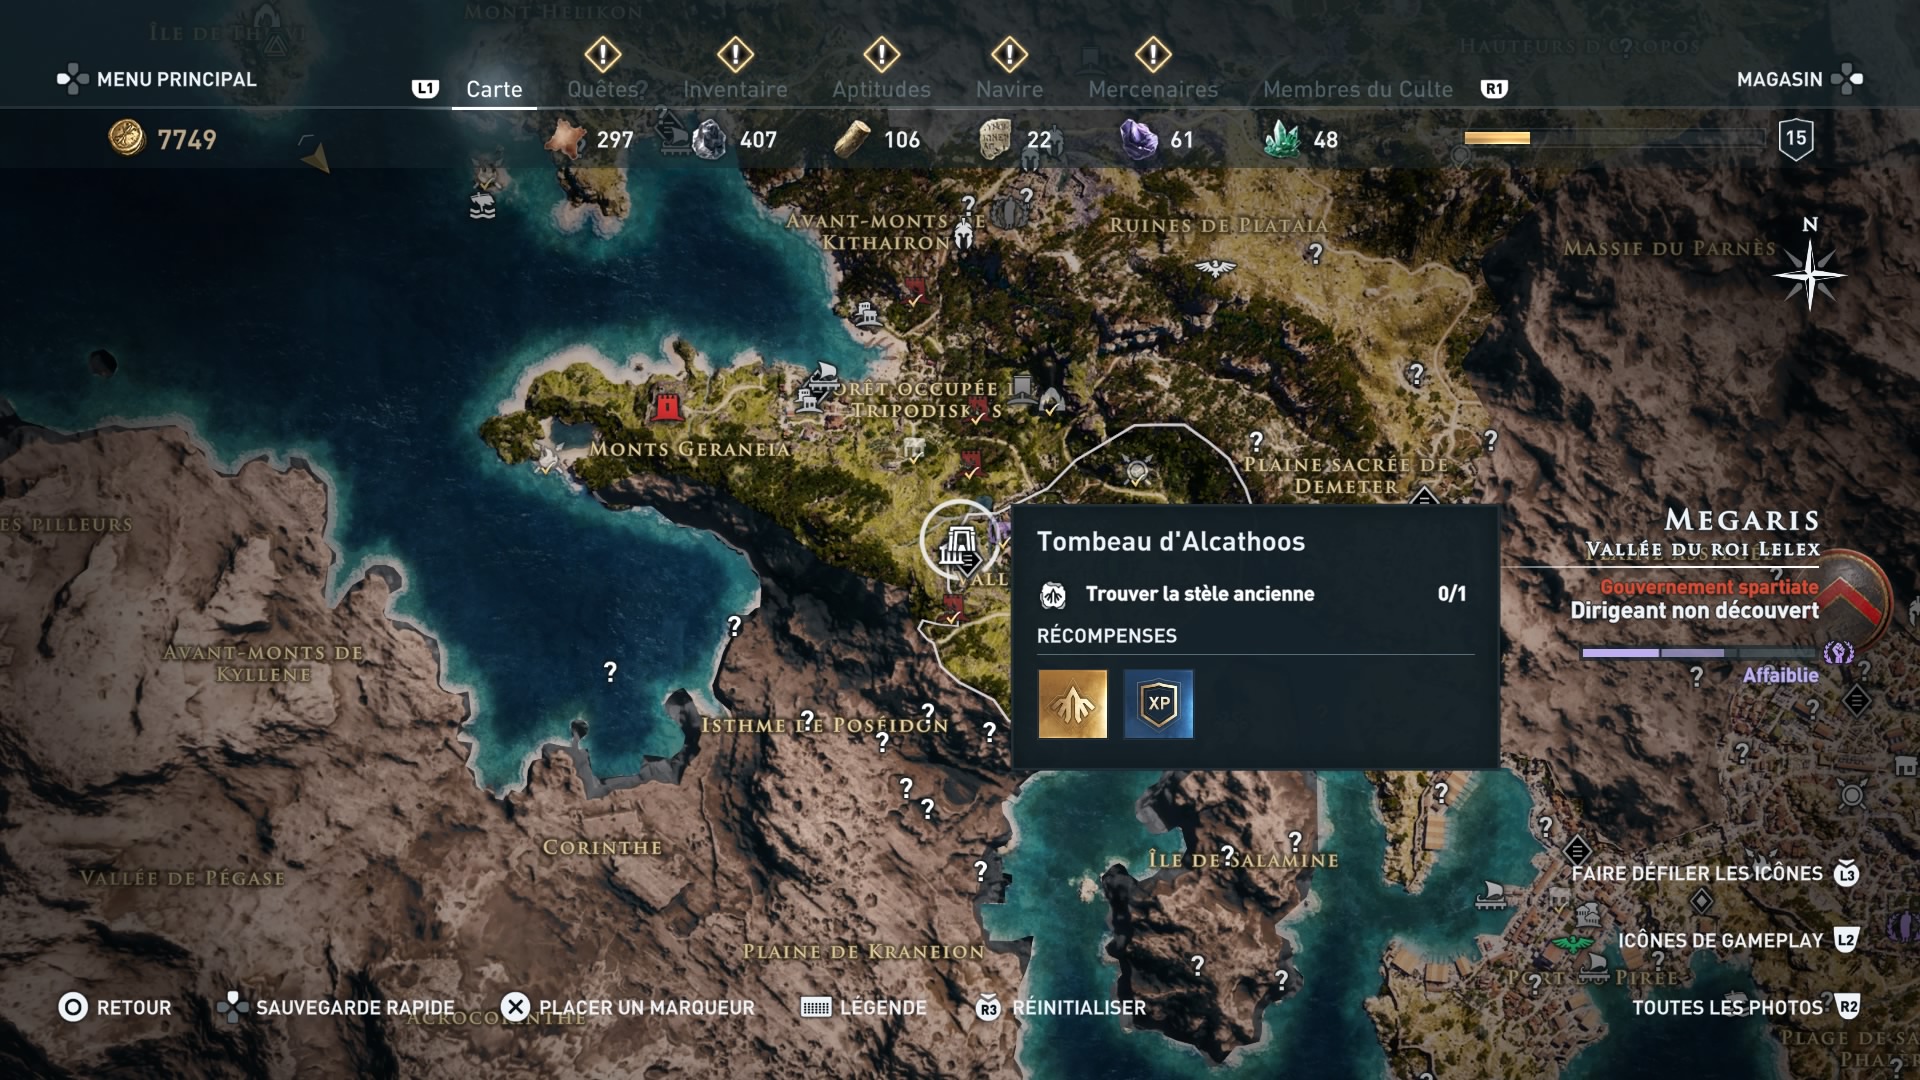 assassin's creed odyssey, ps4, xbox one, pc,u ubisosft, soluce, astuce, emplacement tombeau et stèle ancienne, megaris, tombeau d'alacthoos